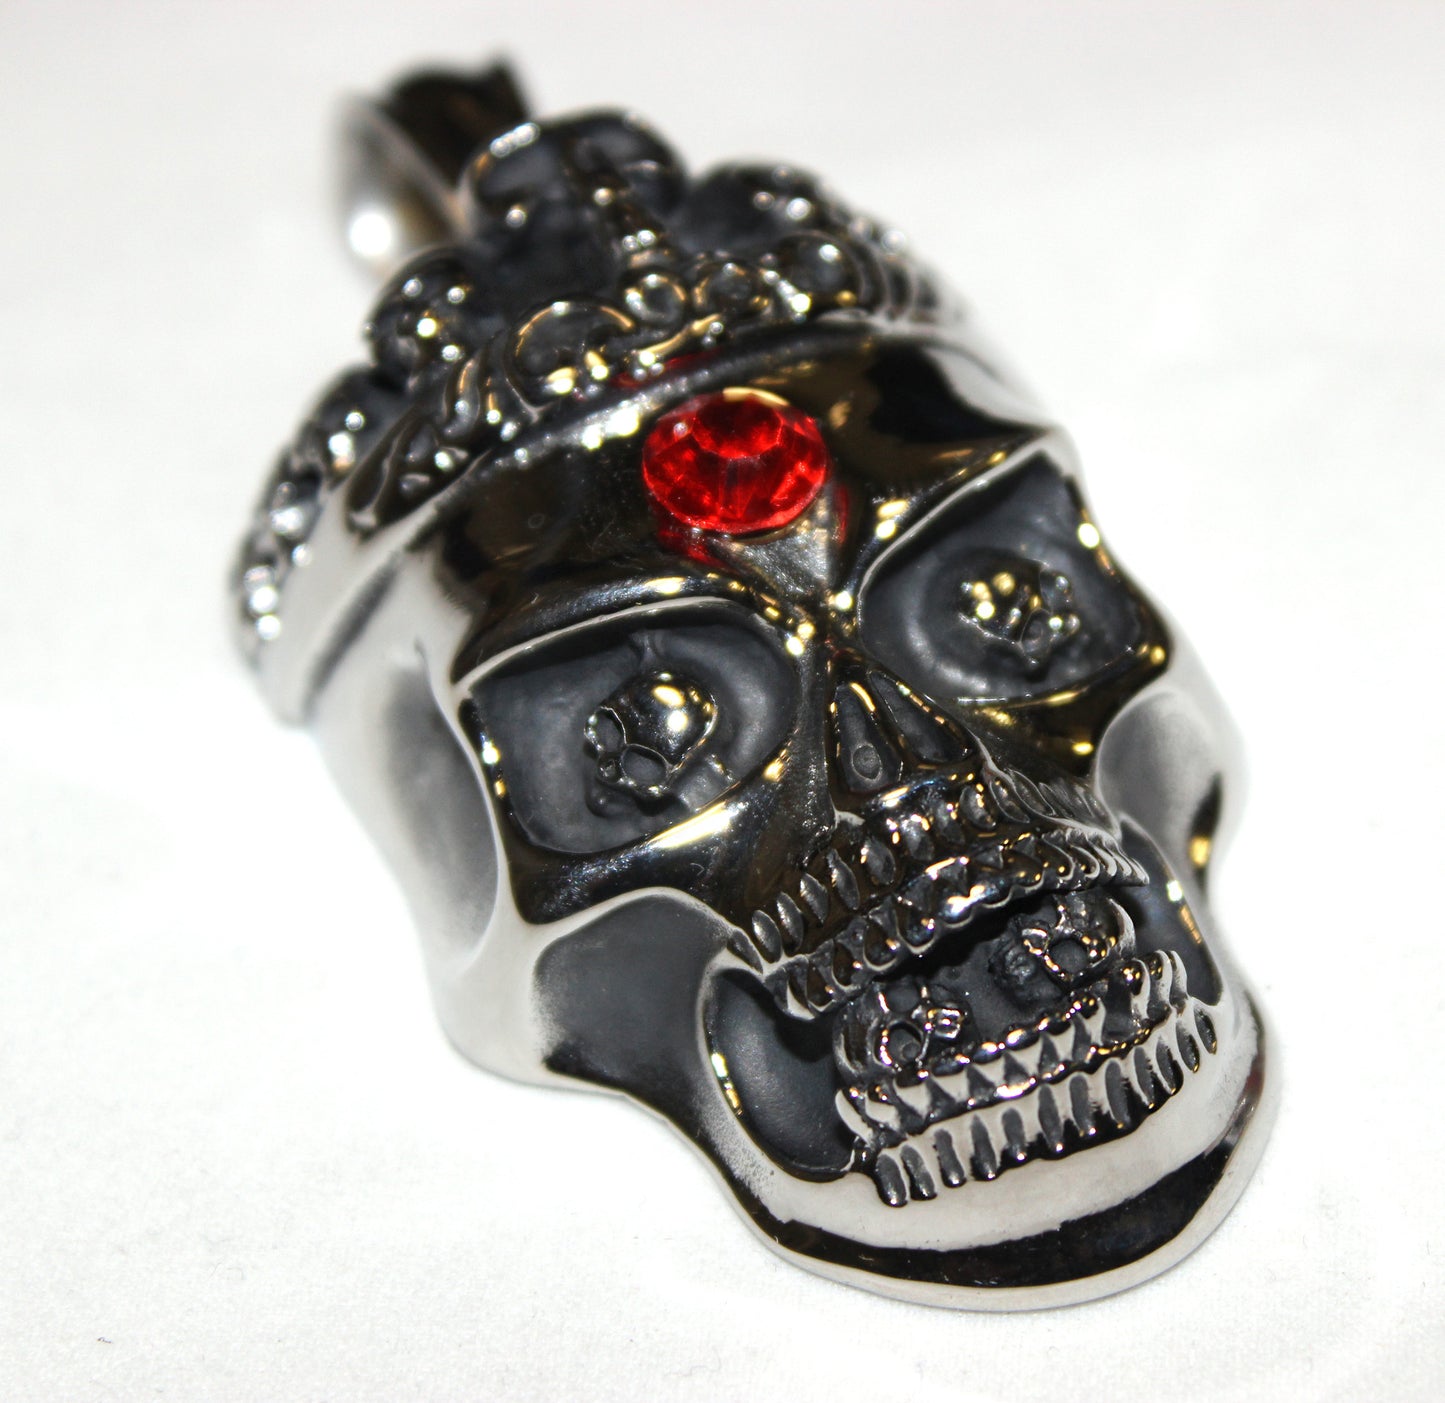 Stainless Steel Large Skull Crown with Red Stone Pendant- UDINC0472